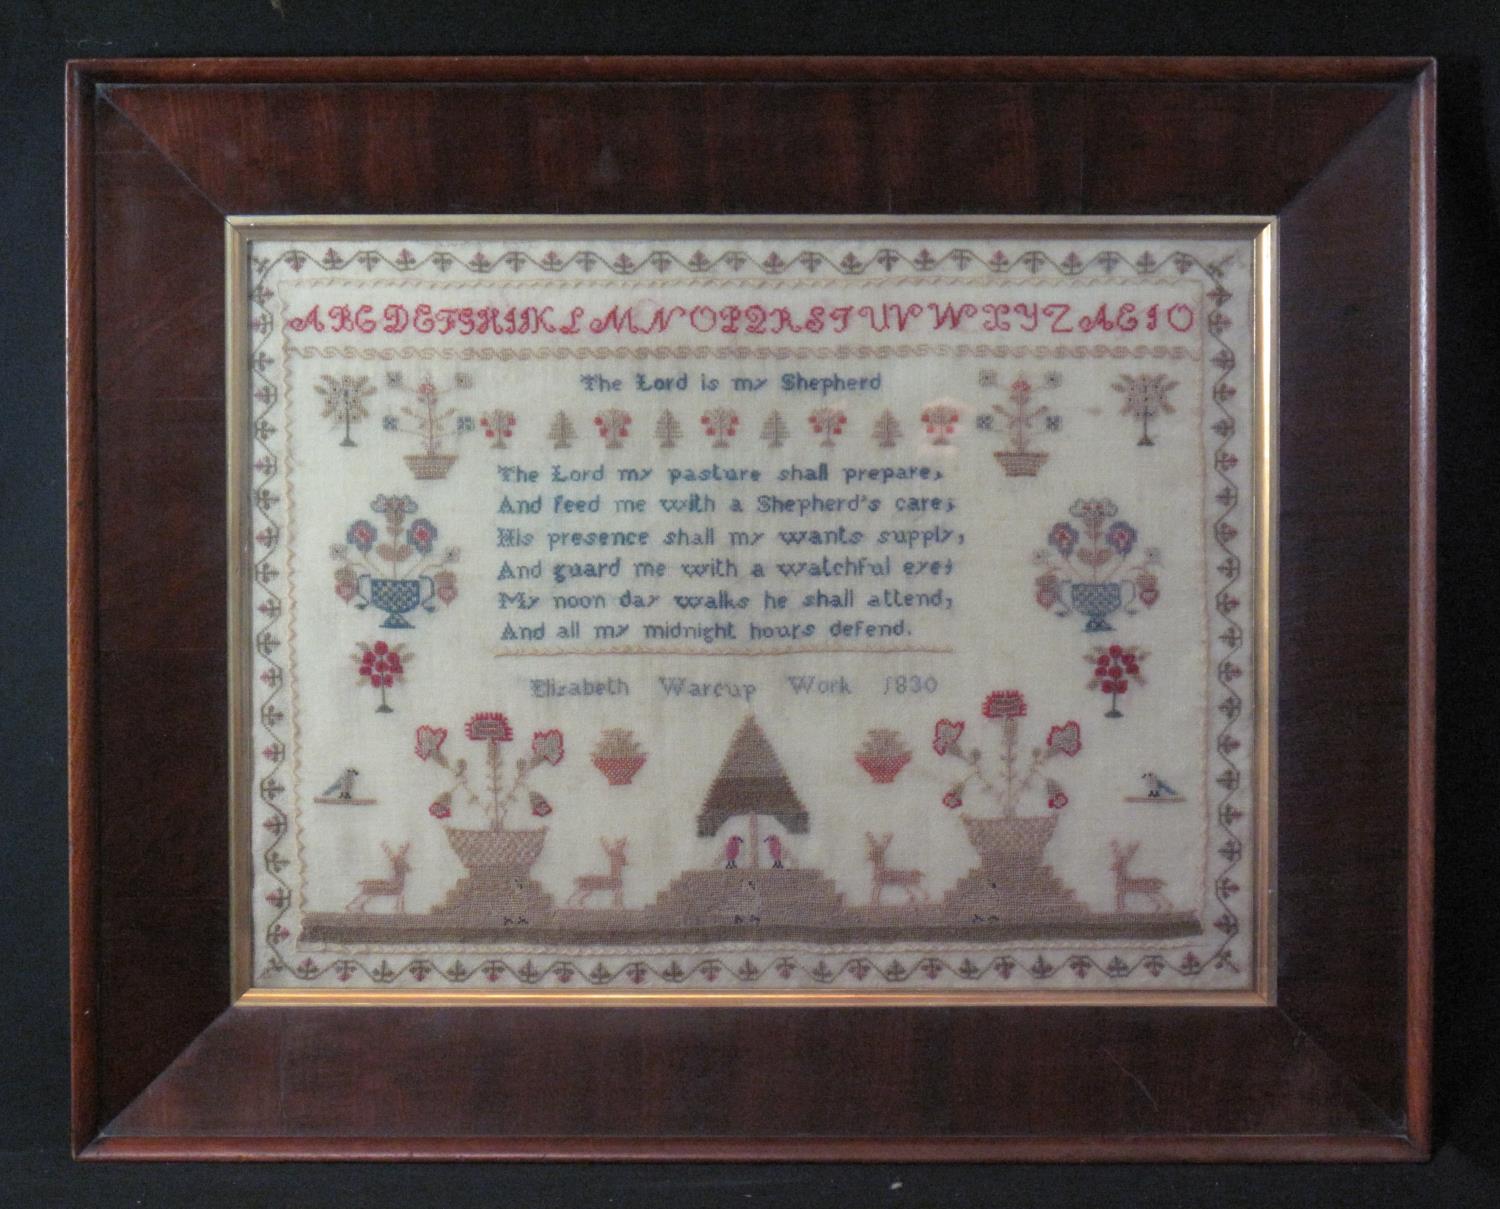 19TH CENTURY CHILD'S NEEDLEPOINT SAMPLER by Elizabeth Warcup, 'Work 1830', with religious text '